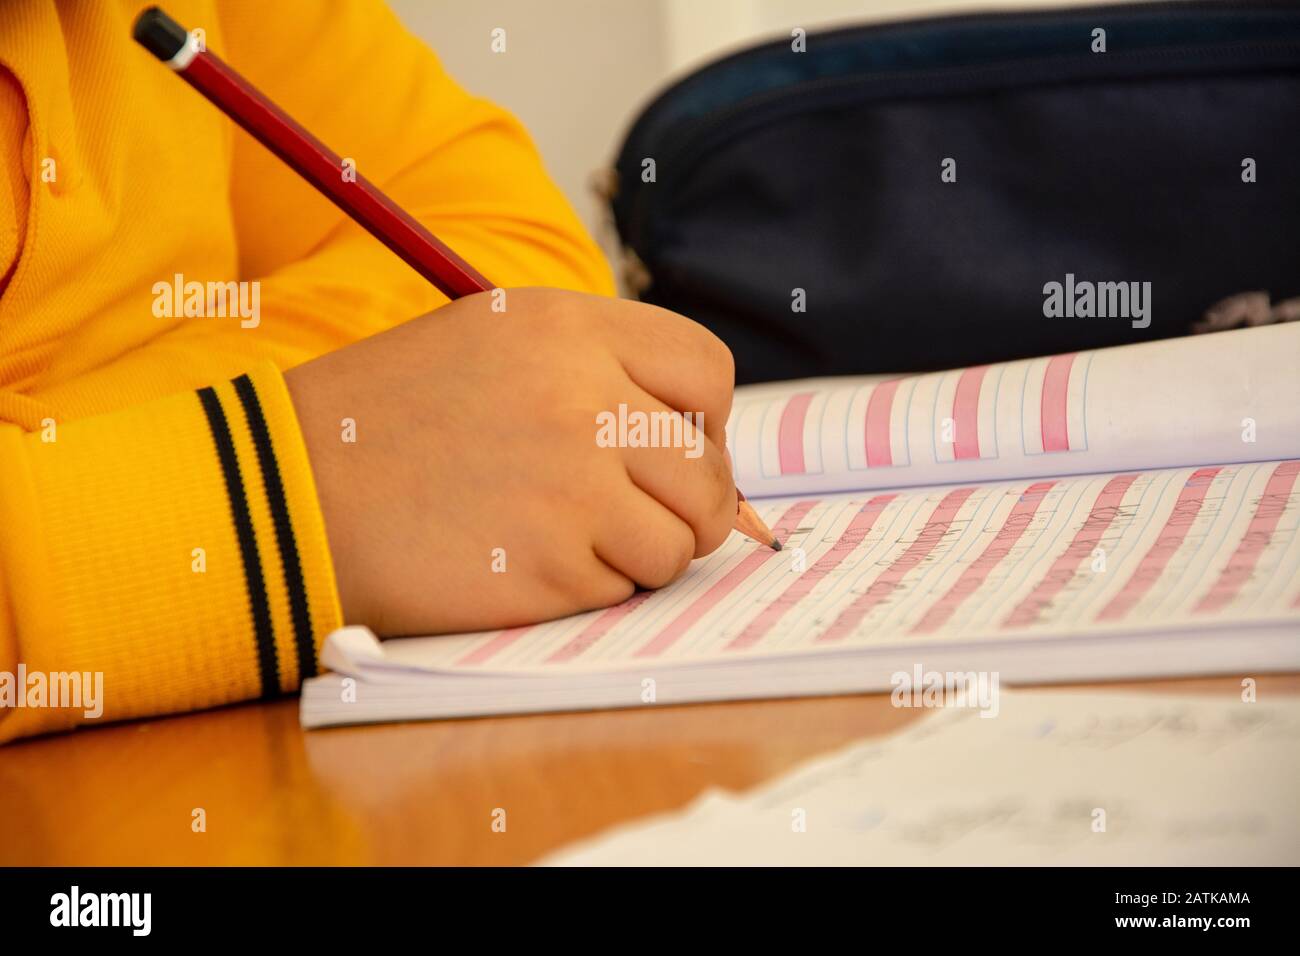 Unrecognizable elementary school student in school uniform is writing in close-up Stock Photo